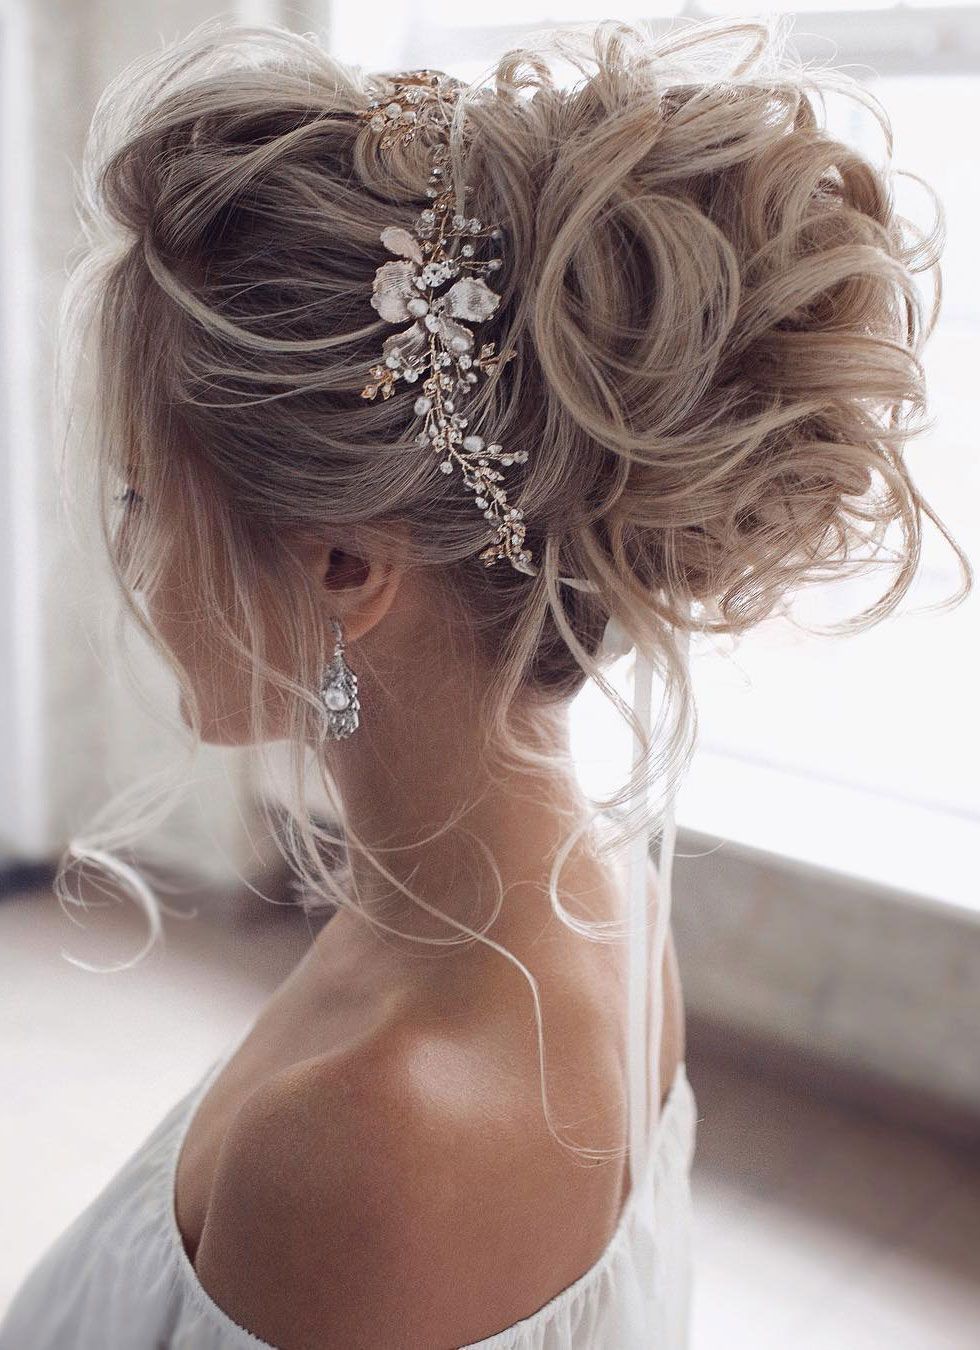 Gorgeous & Super-Chic Hairstyle That's Breathtaking -   18 hairstyles Bun messy ideas